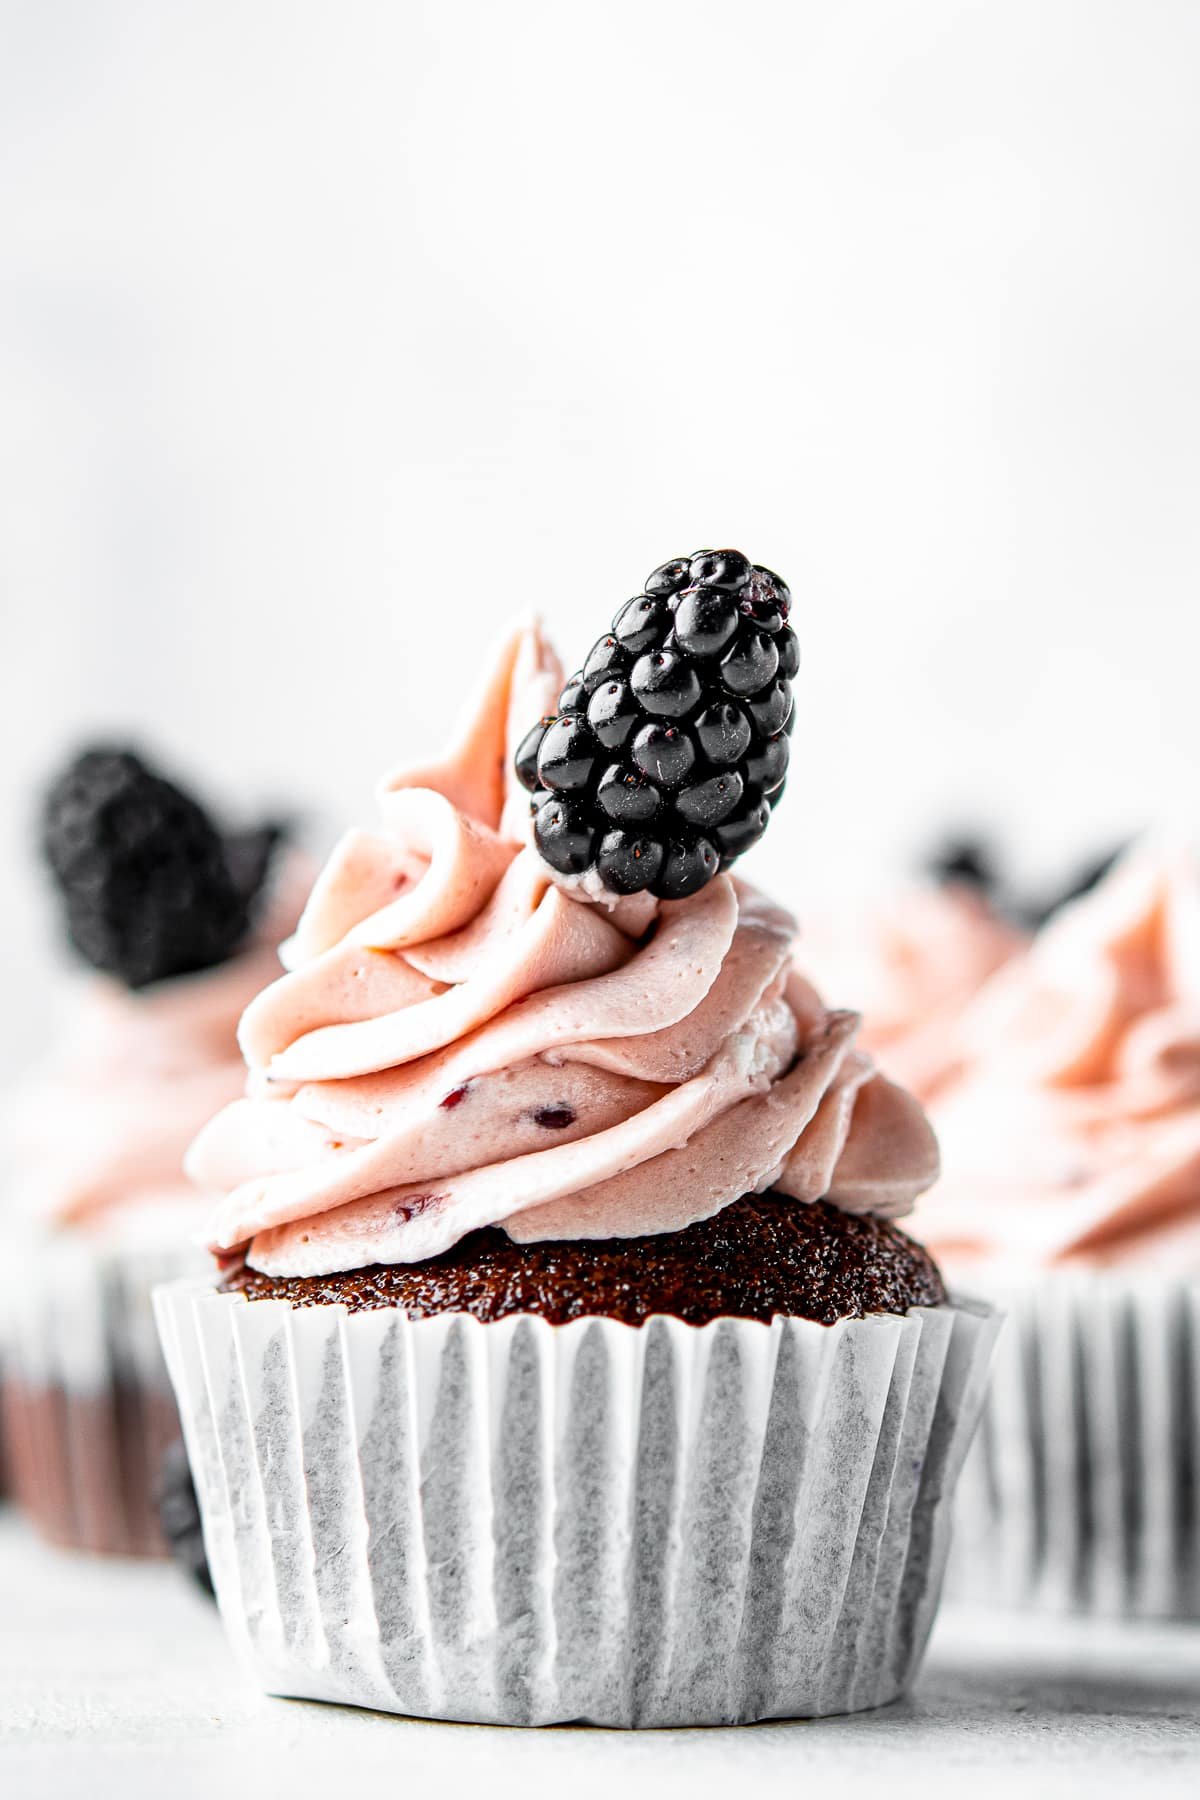 upclose image of chocolate cupcakes with blackberry buttercream